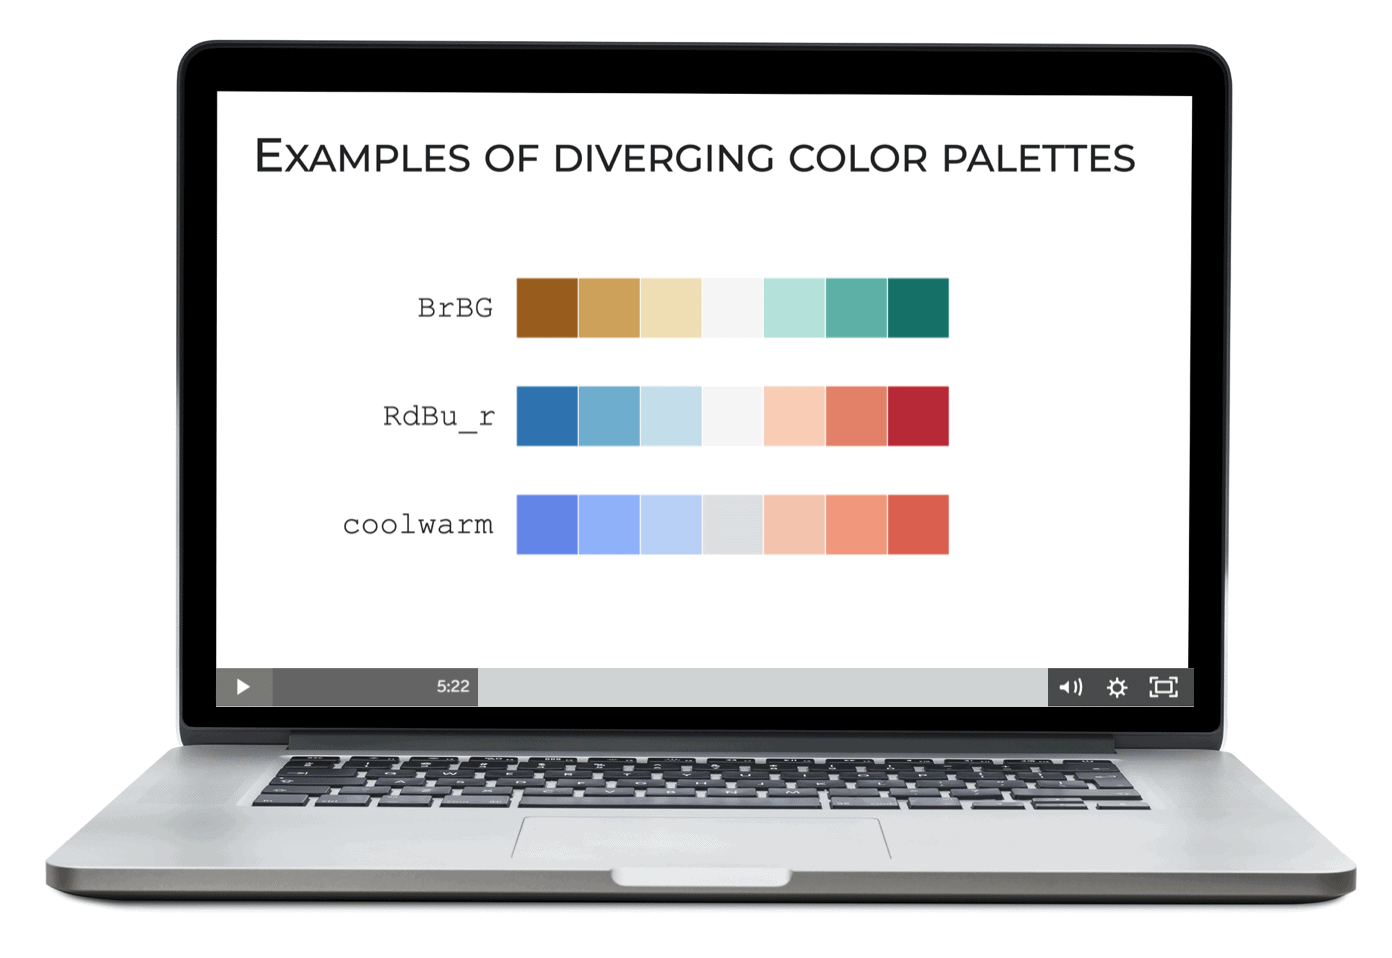 A laptop showing several diverging color palette options for Seaborn.